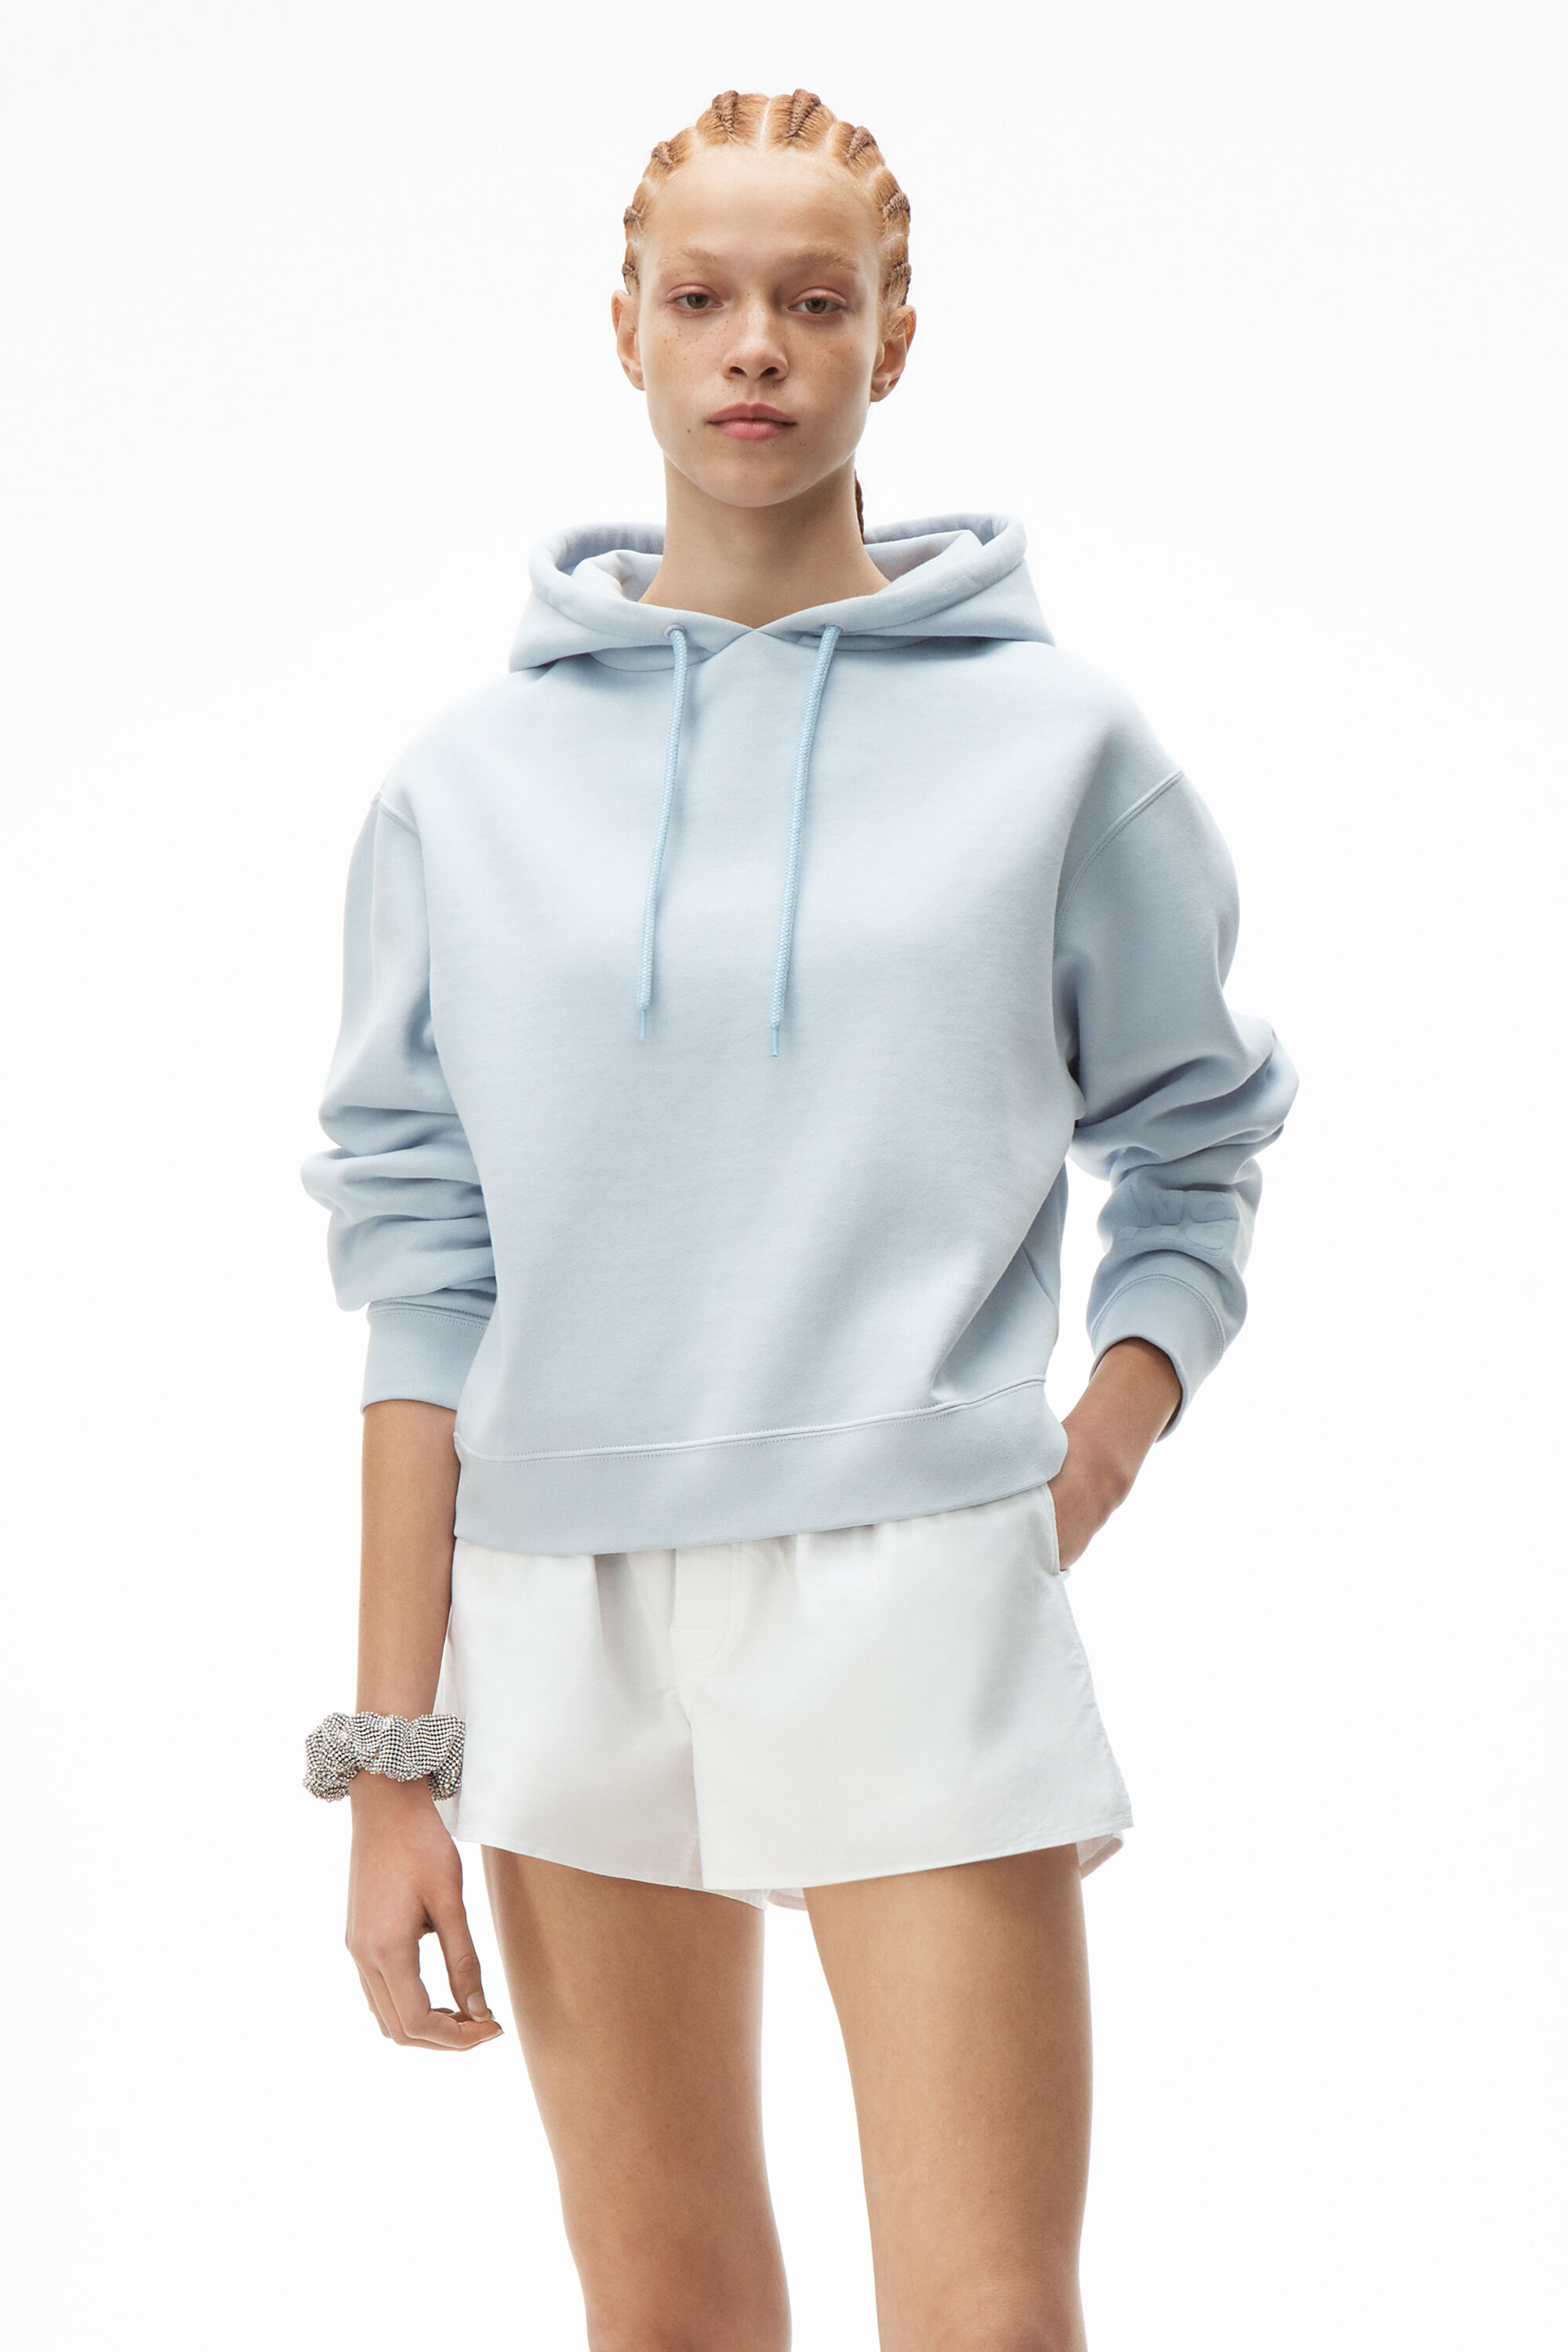 adidas Originals by Alexander Wang White You For E Yeah Exceed The Limit Hoodie  adidas Originals by Alexander Wang